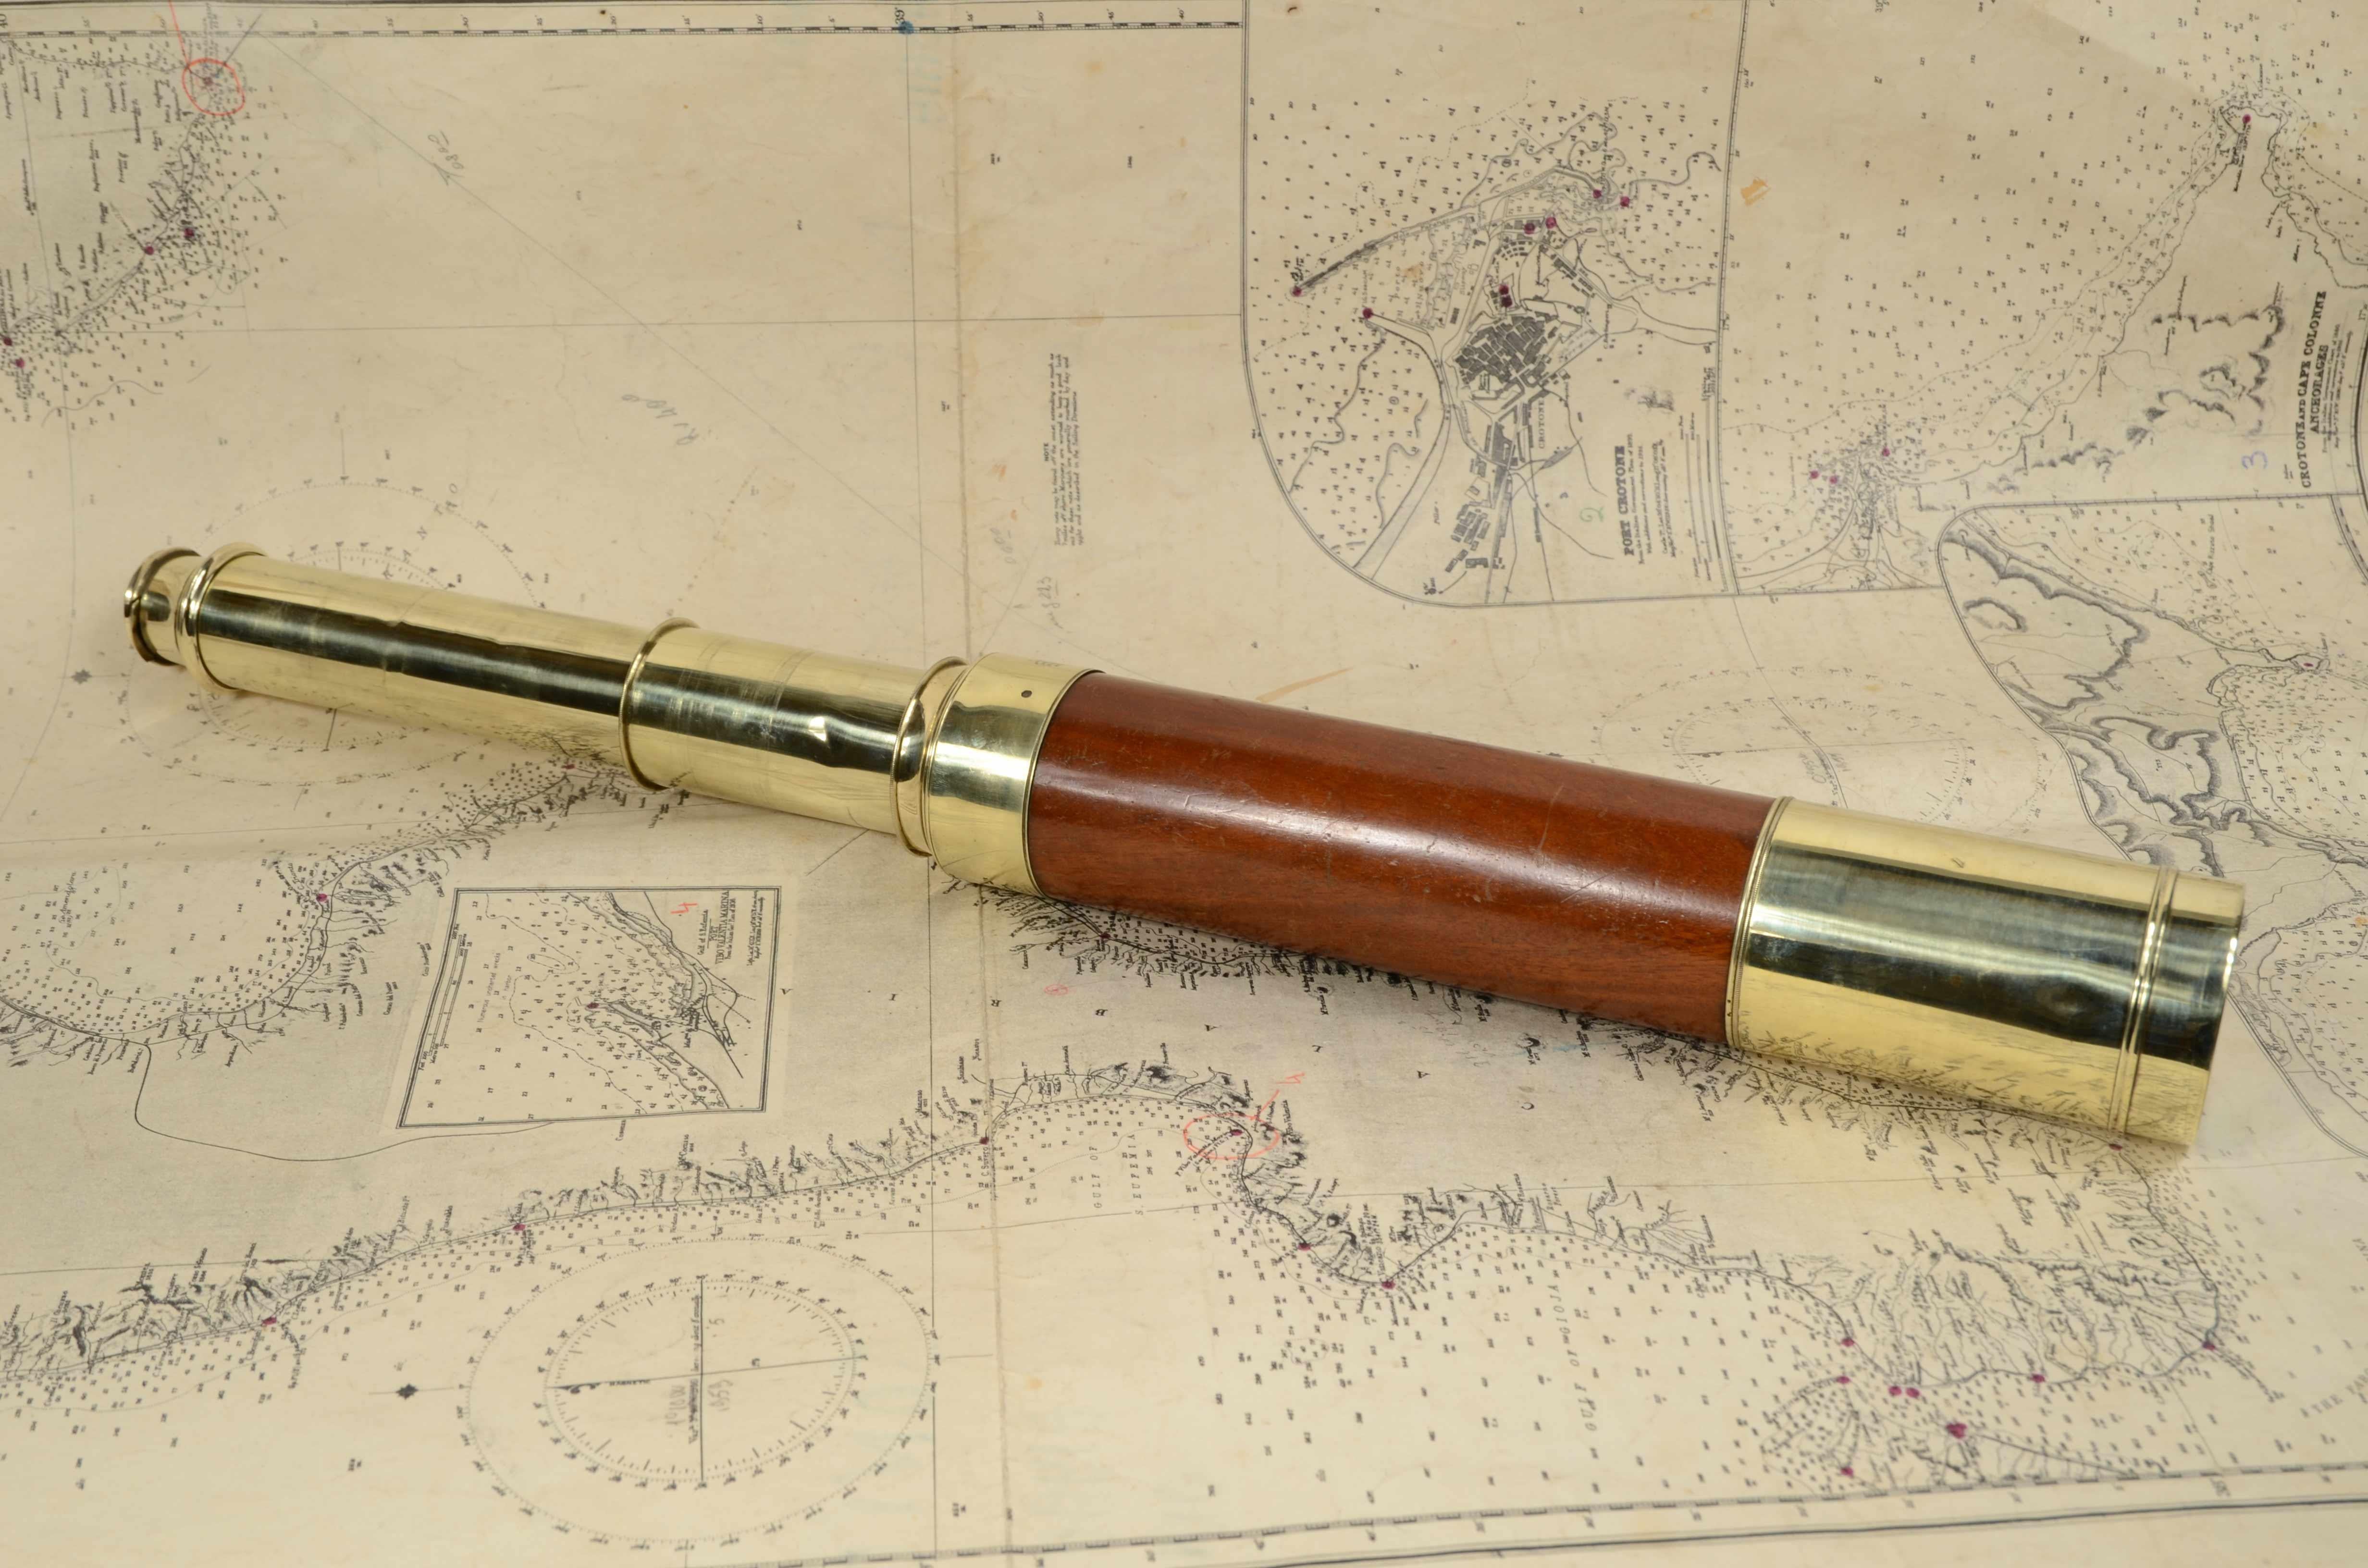 Brass round-sectioned telescope with mahogany mount, two-extension focus, complete with dust tab and sunshade extension.
Good condition perfectly working, custom made wood and brass stand
Signed J. Somalvico & C. London from the first half of the